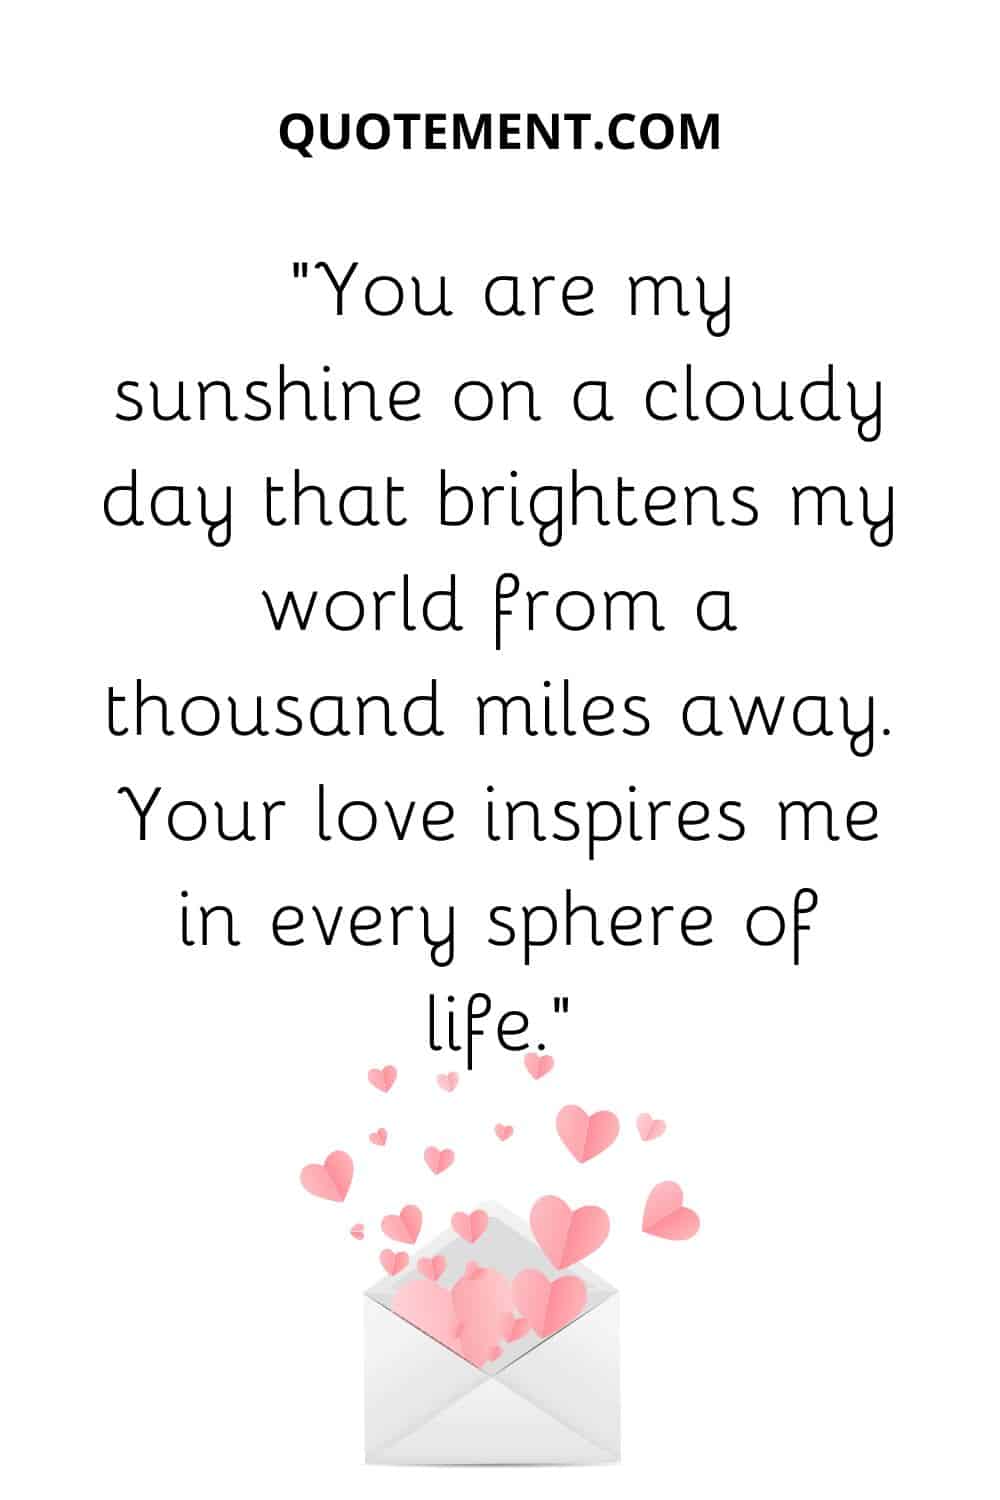 “You are my sunshine on a cloudy day that brightens my world from a thousand miles away. Your love inspires me in every sphere of life.”